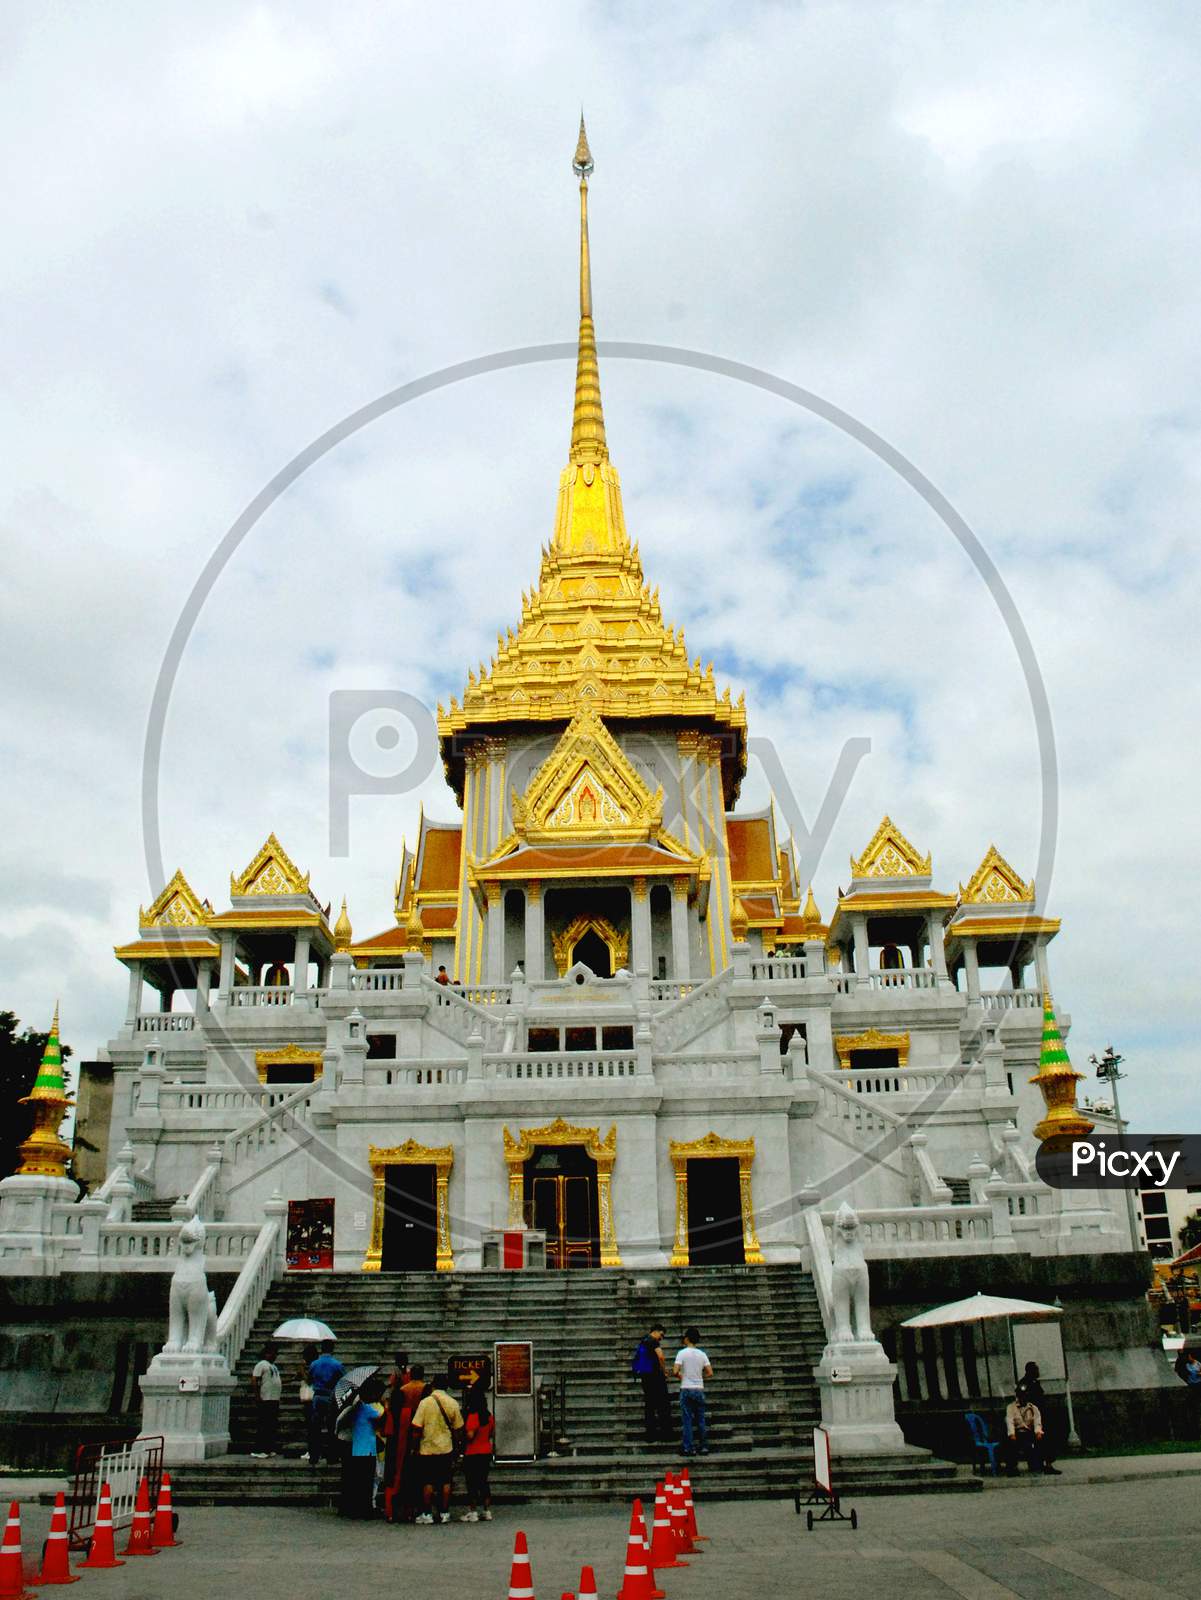 Temple of the Golden Buddha or Wat Traimit in Chinatown, Bangkok